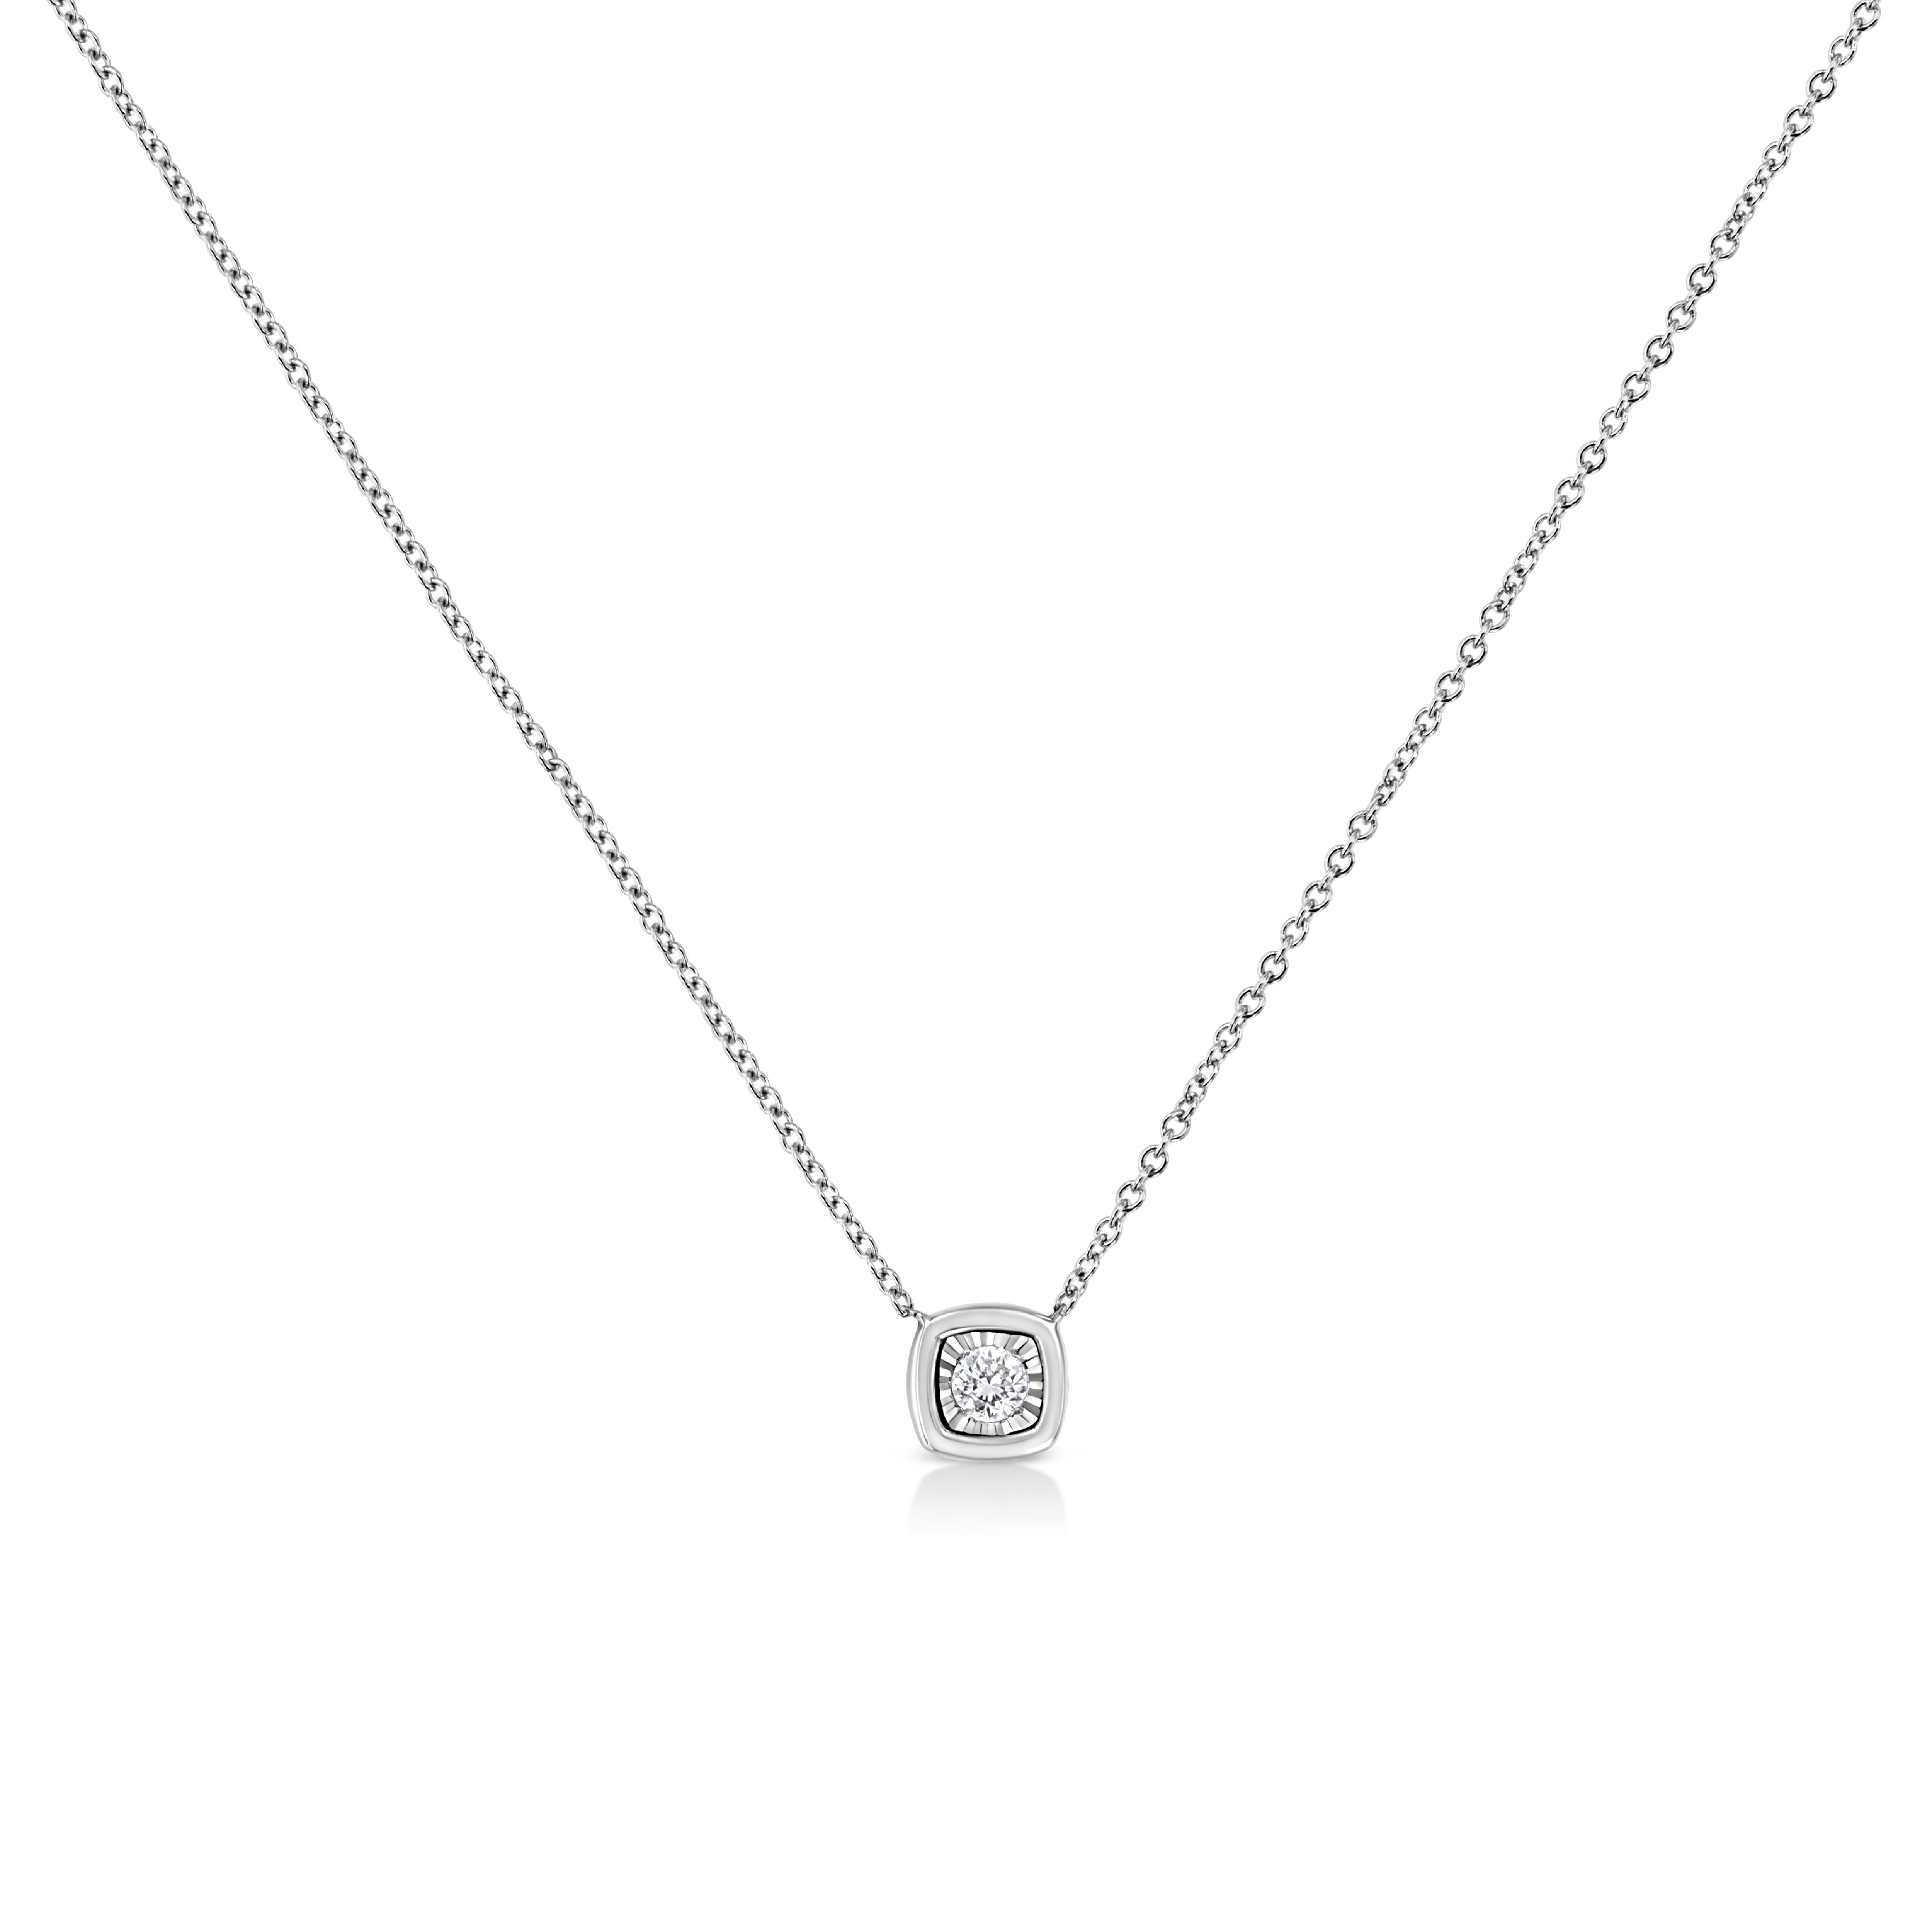 Haven’t we all had the dream of getting ready like a queen for that special day. This square shaped diamond pendant necklace is designed for that queen in you. This 10k white gold pendant is studded with a single 1/10 carat round-cut diamond and is